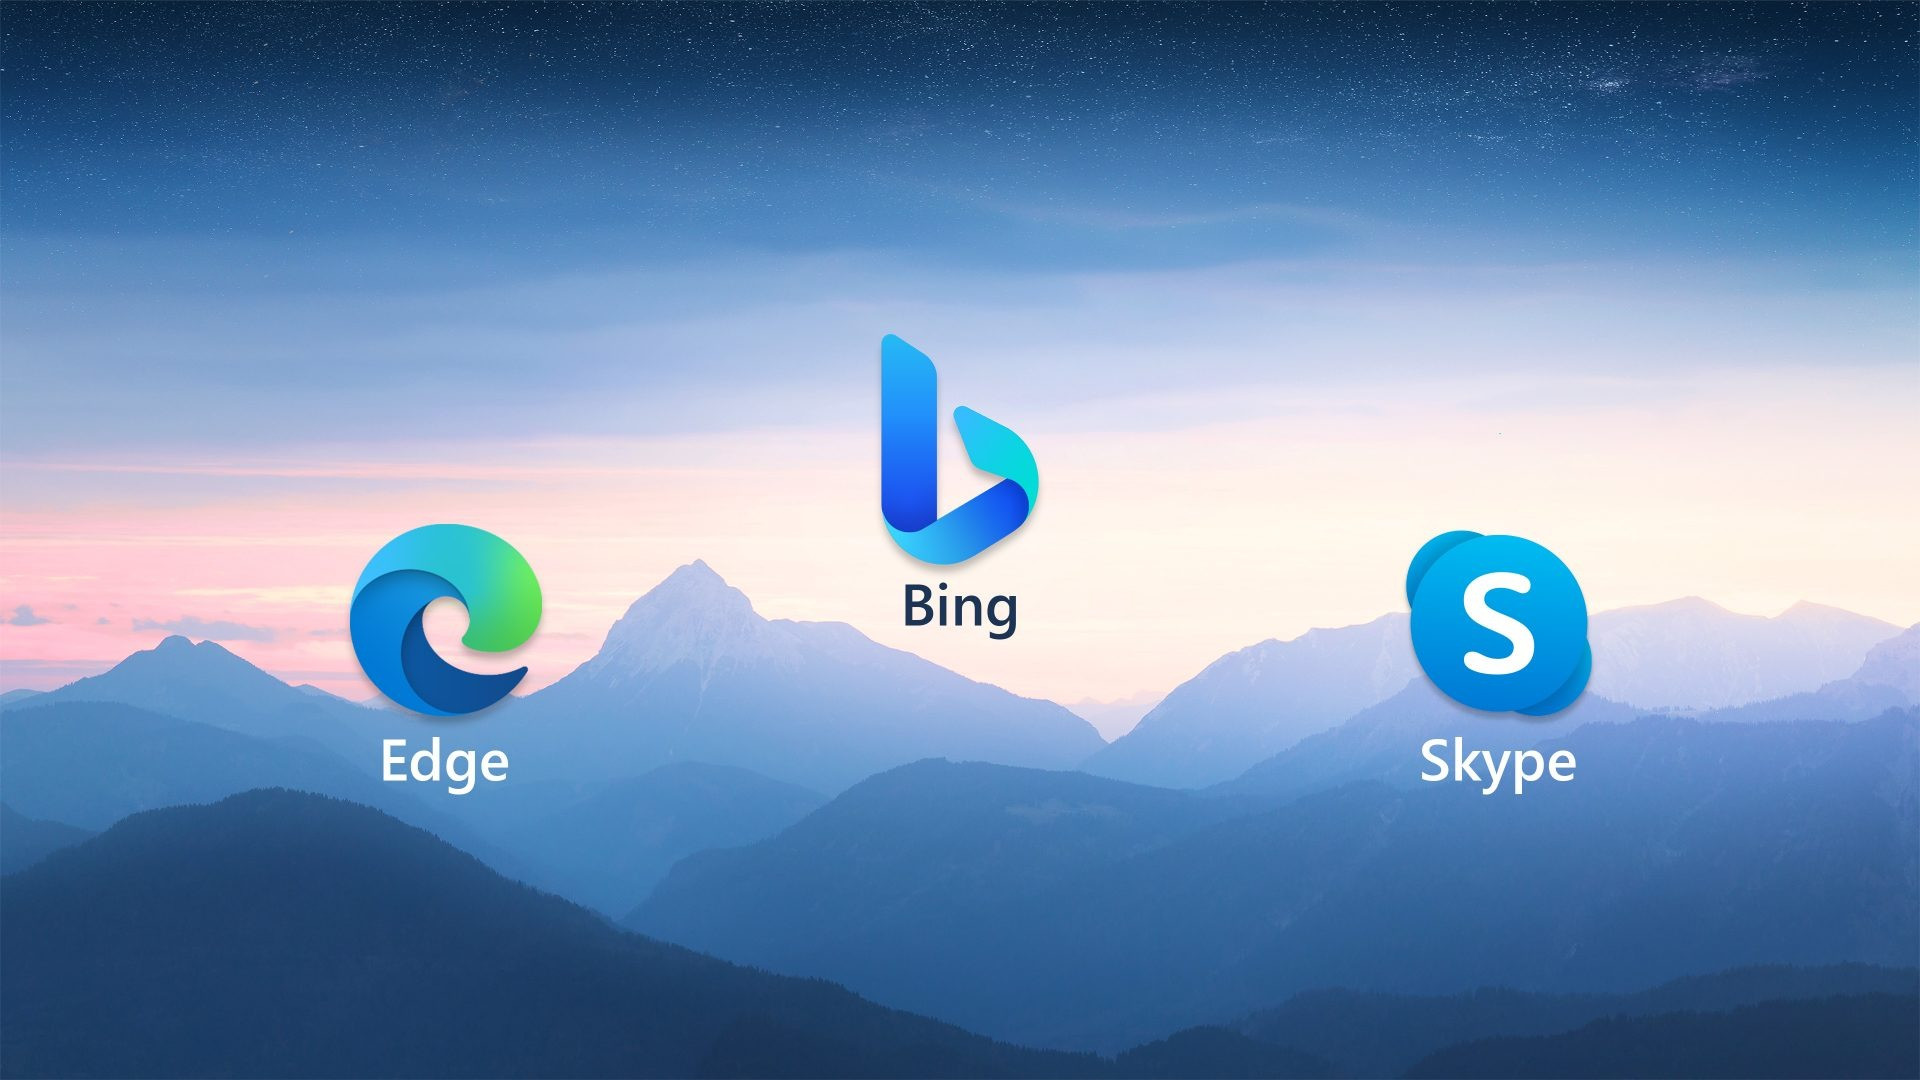 Microsoft’s Bing Chat AI is now open to everyone